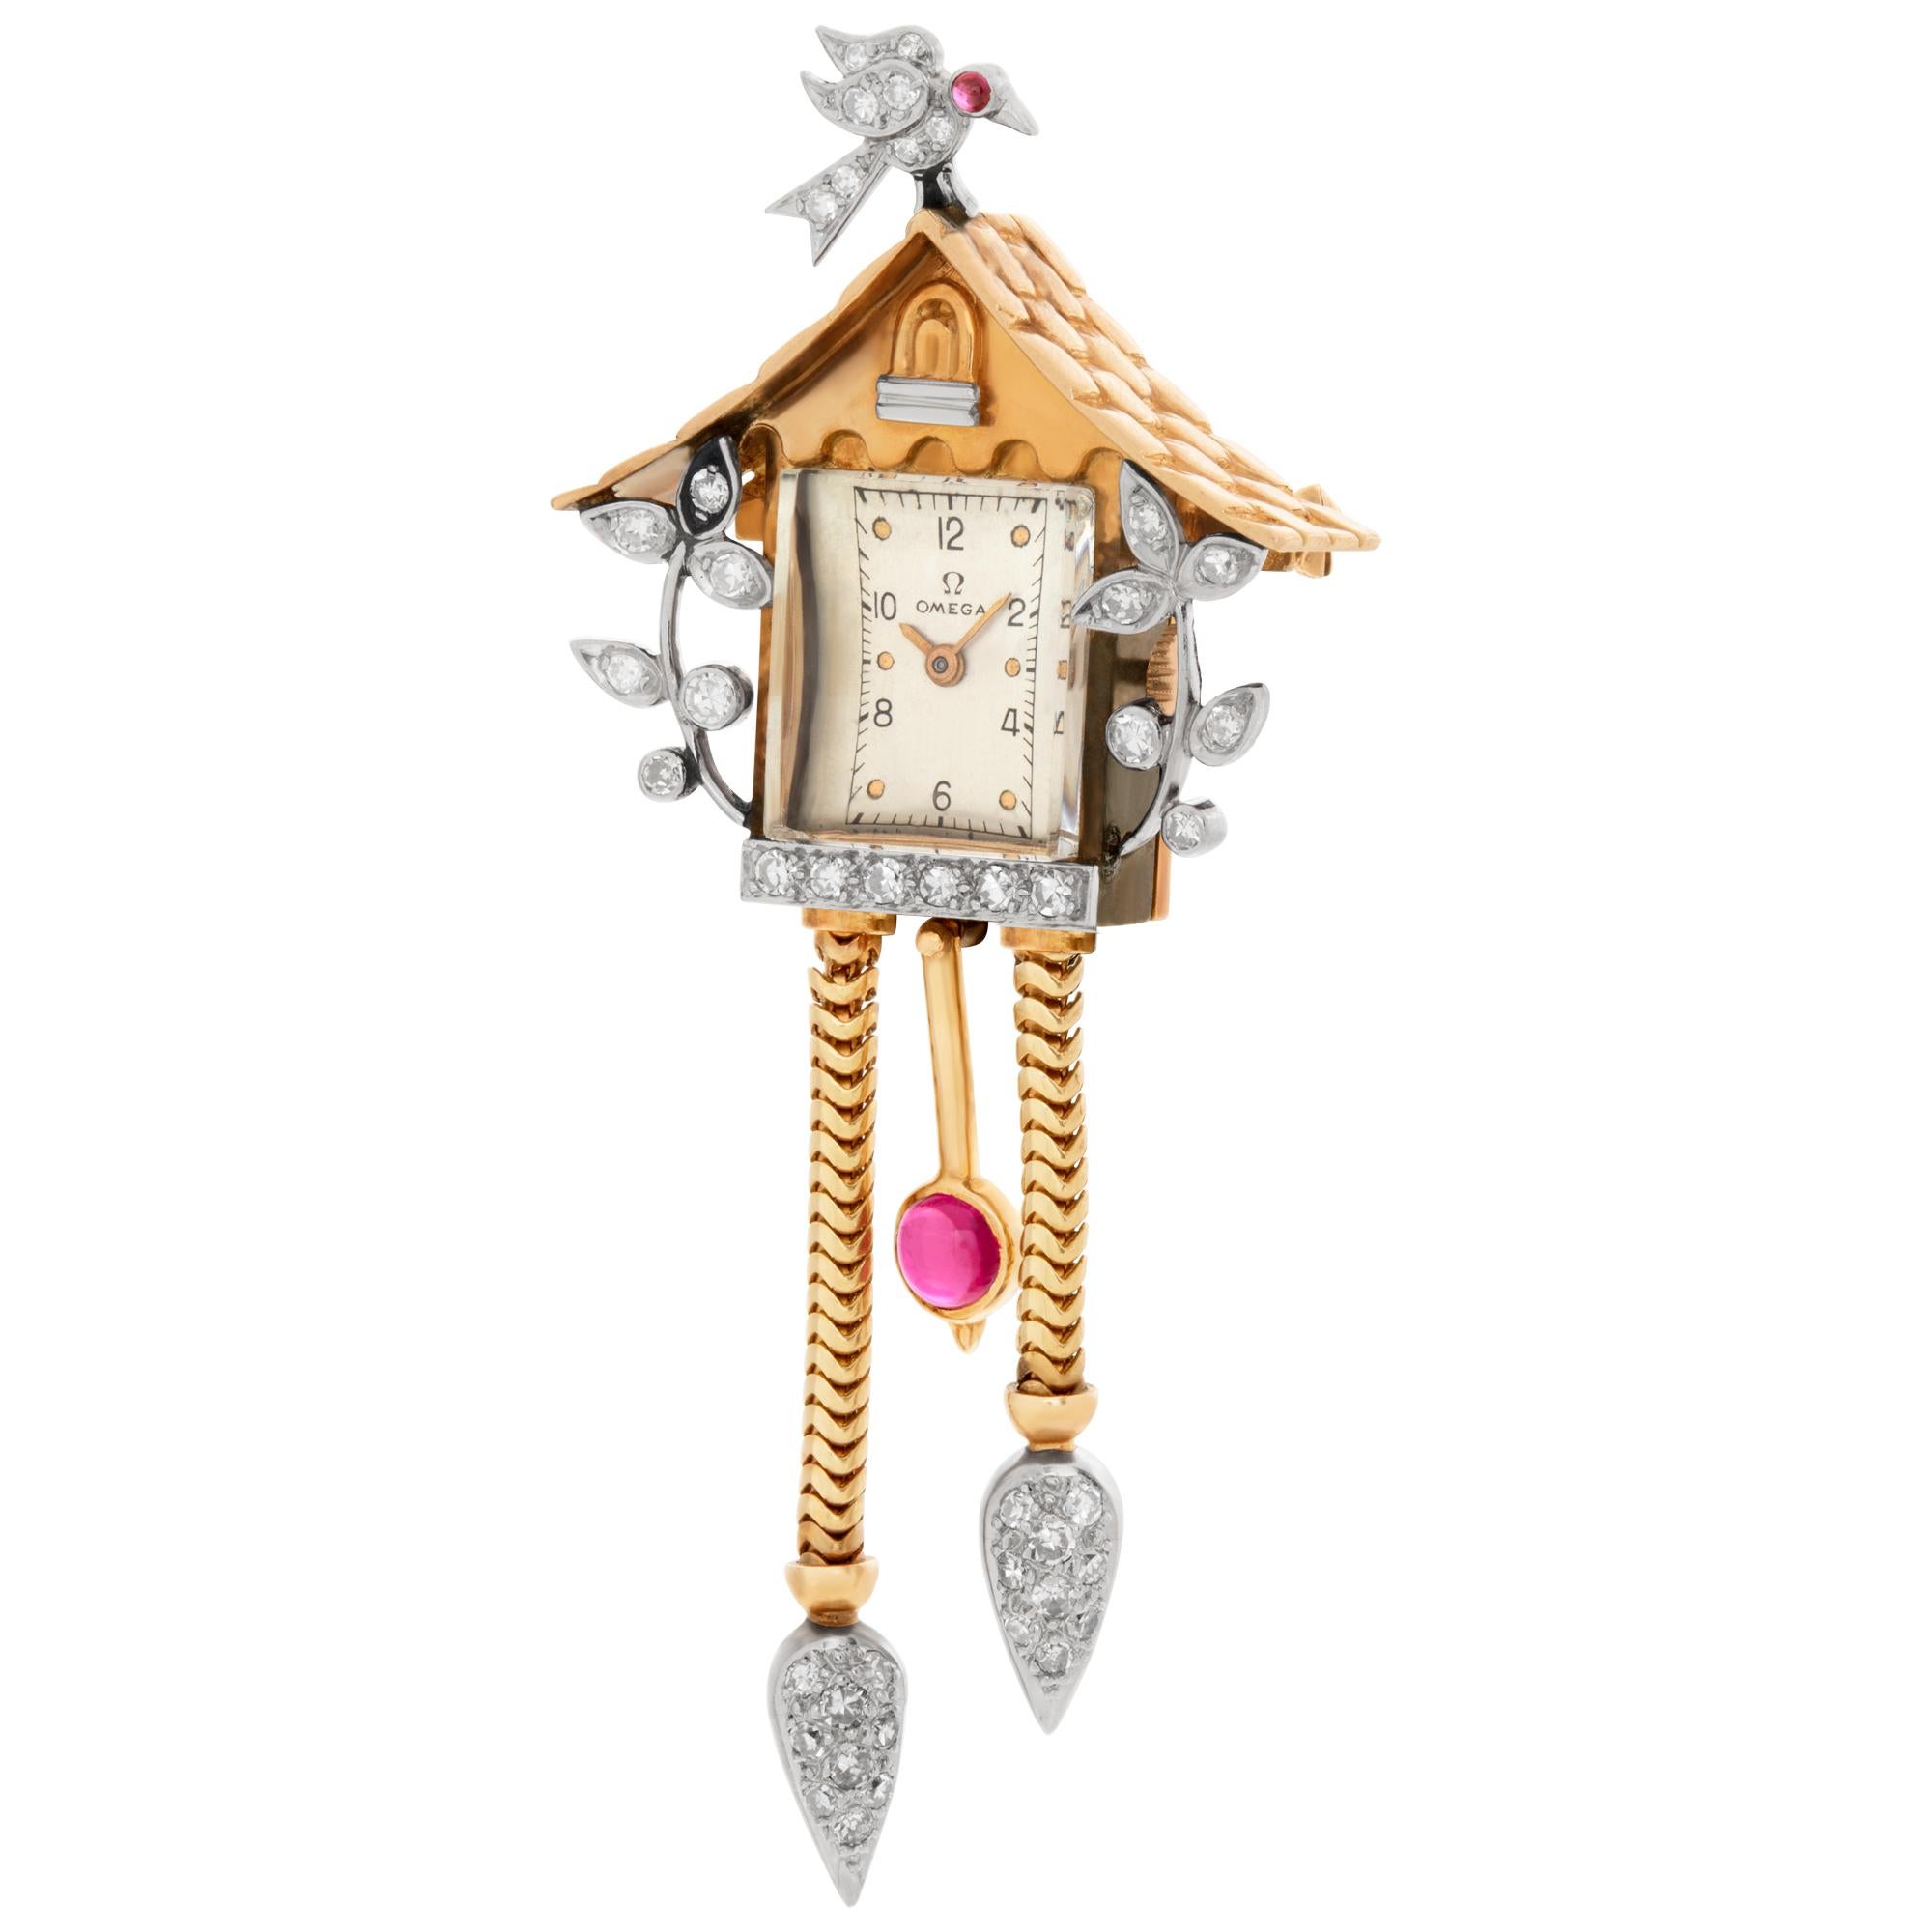 Omega Birdhouse vintage brooch in 14k rose and white gold with ruby and diamond accents.
